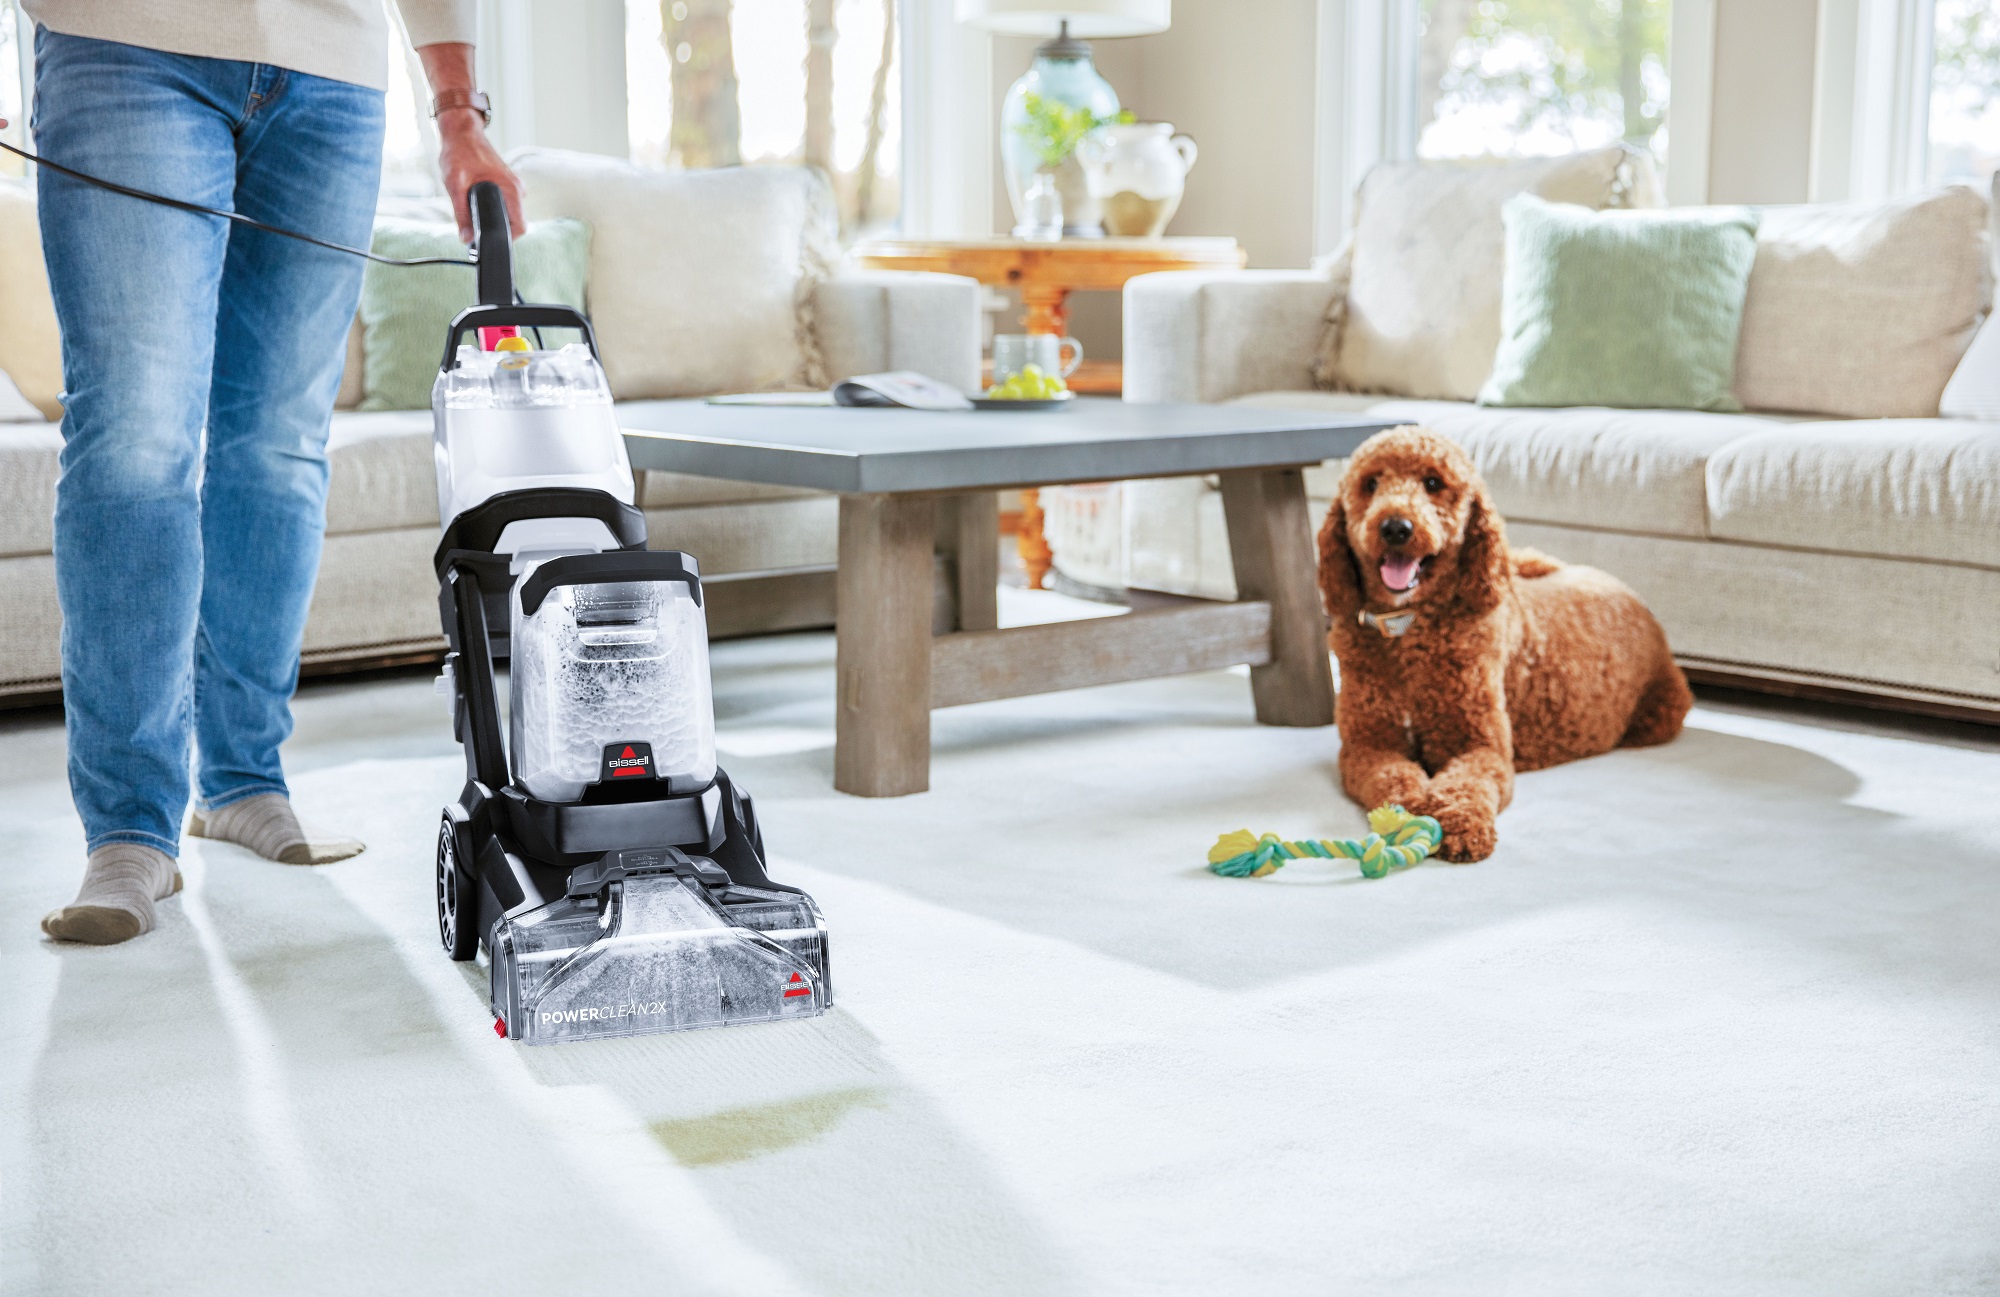 Bissell PowerClean 2x 3112E Series Carpet Cleaner review